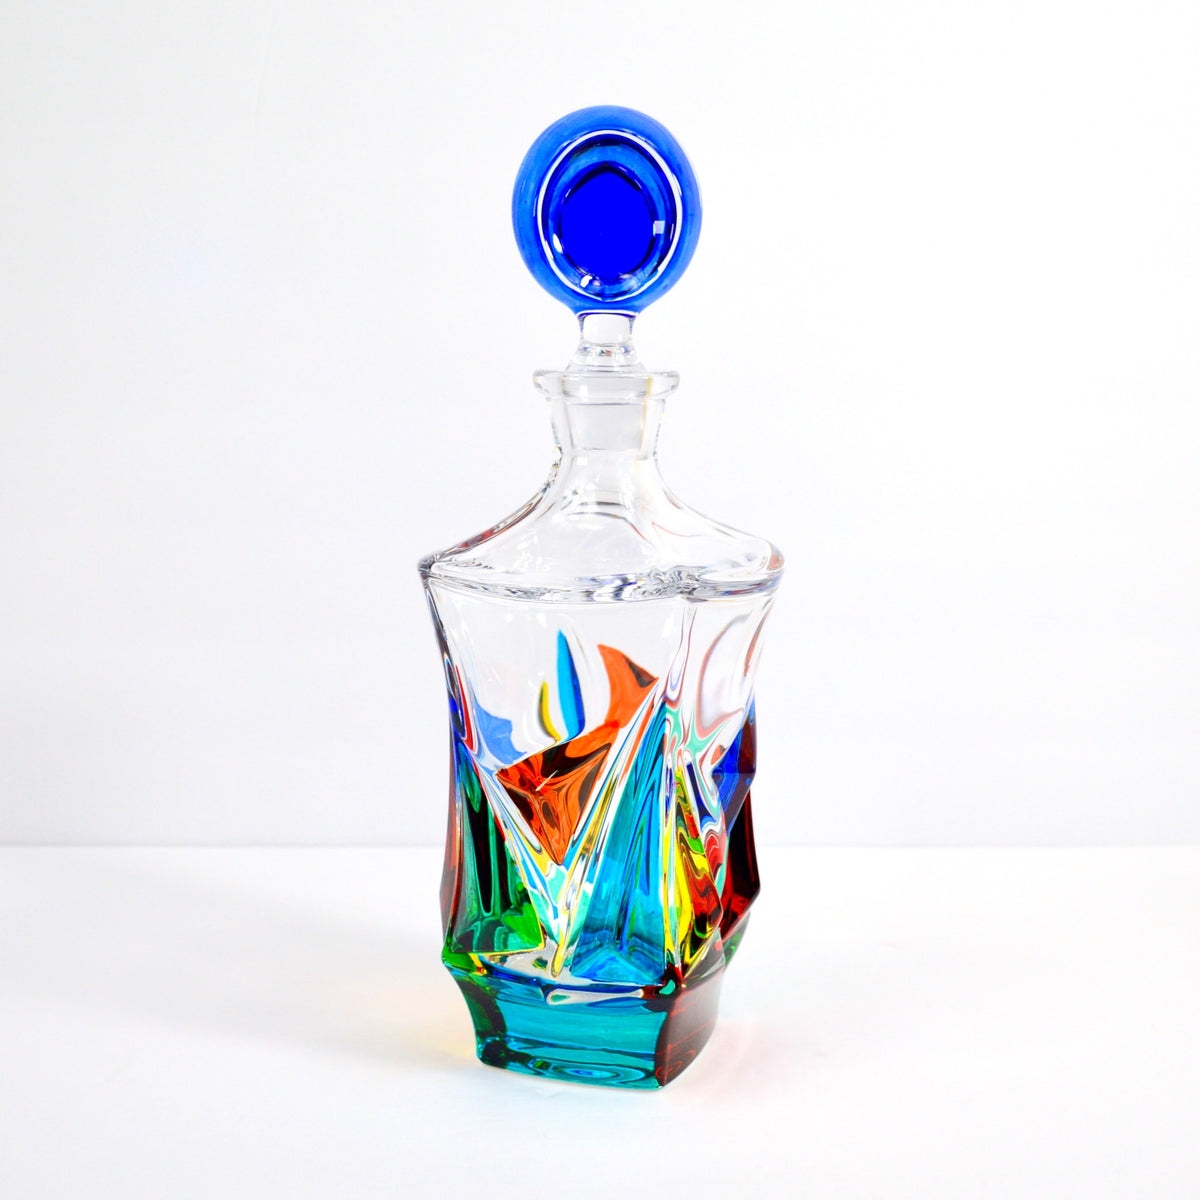 Empress Decanter, Hand-Painted Italian Crystal, Made in Italy - My Italian Decor